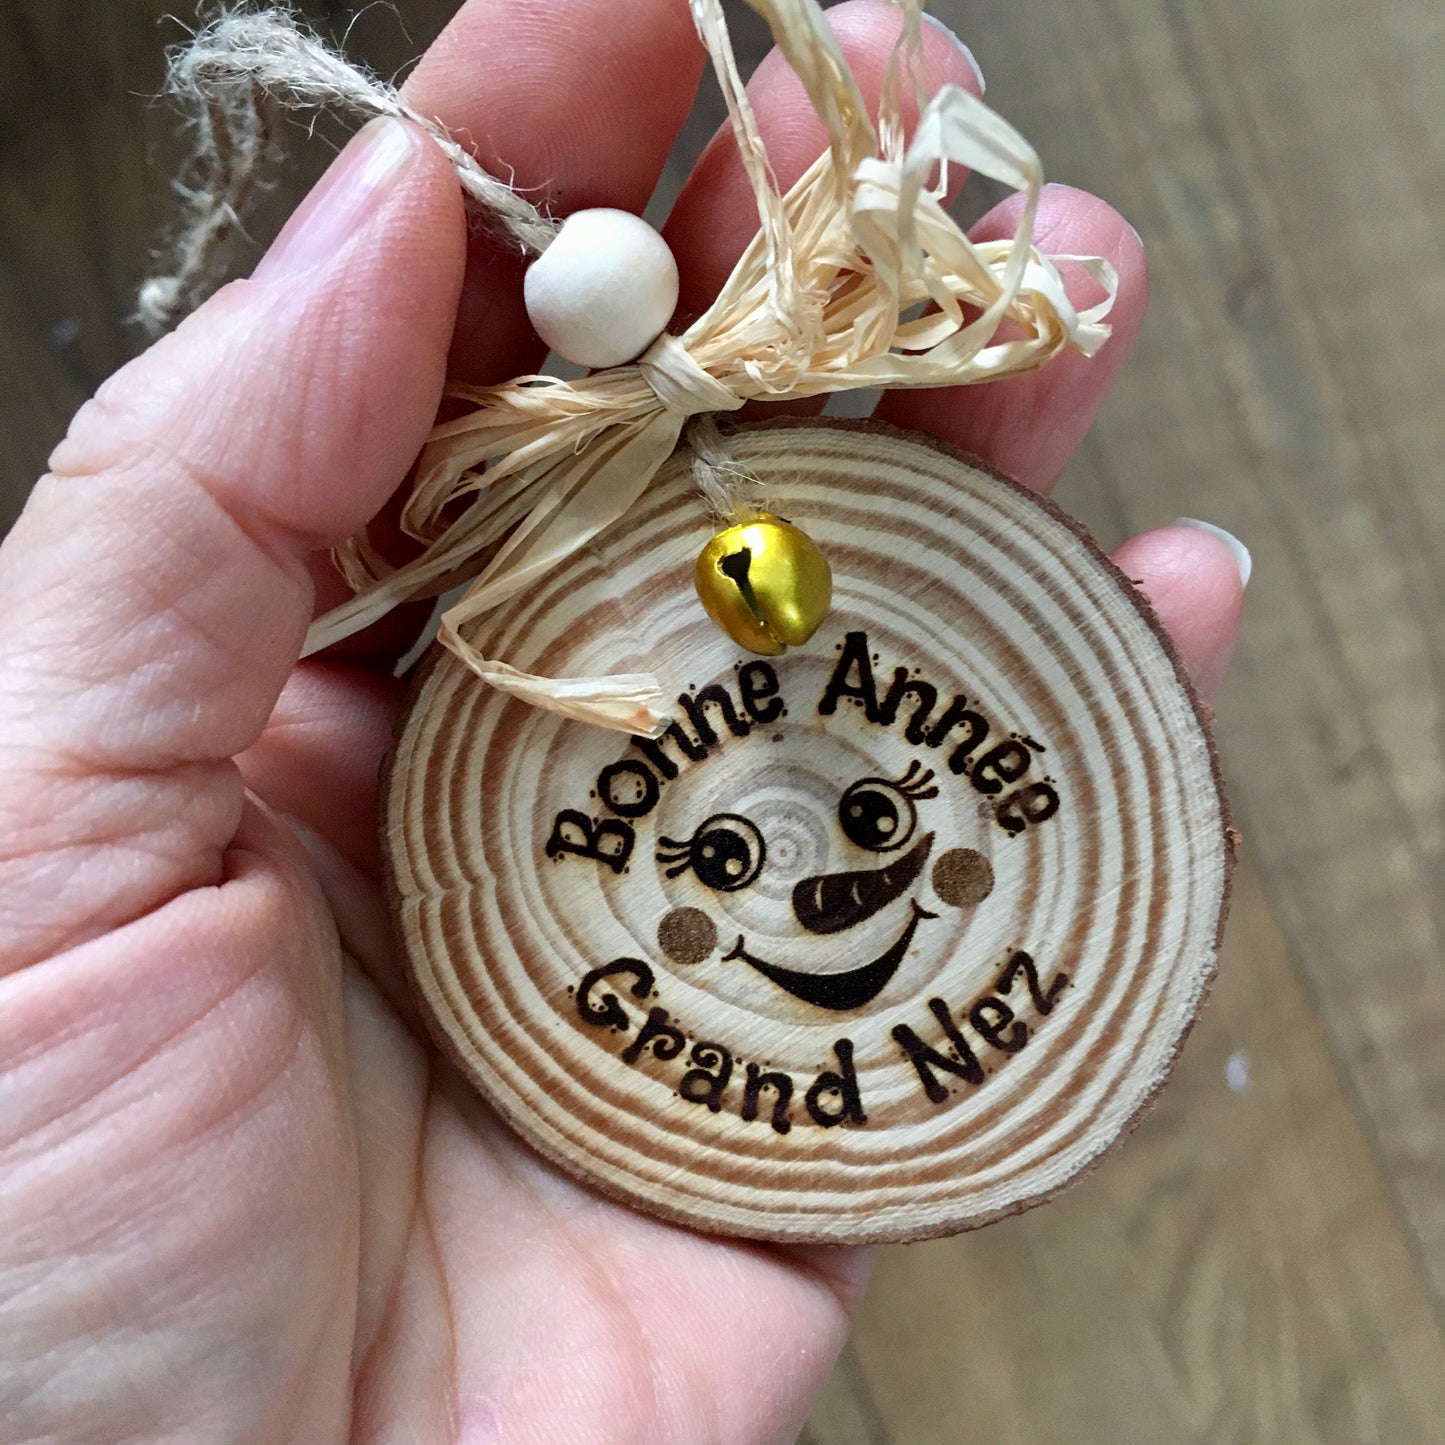 ORNAMENT for GIFTS or TREE - BONNE ANNÉE